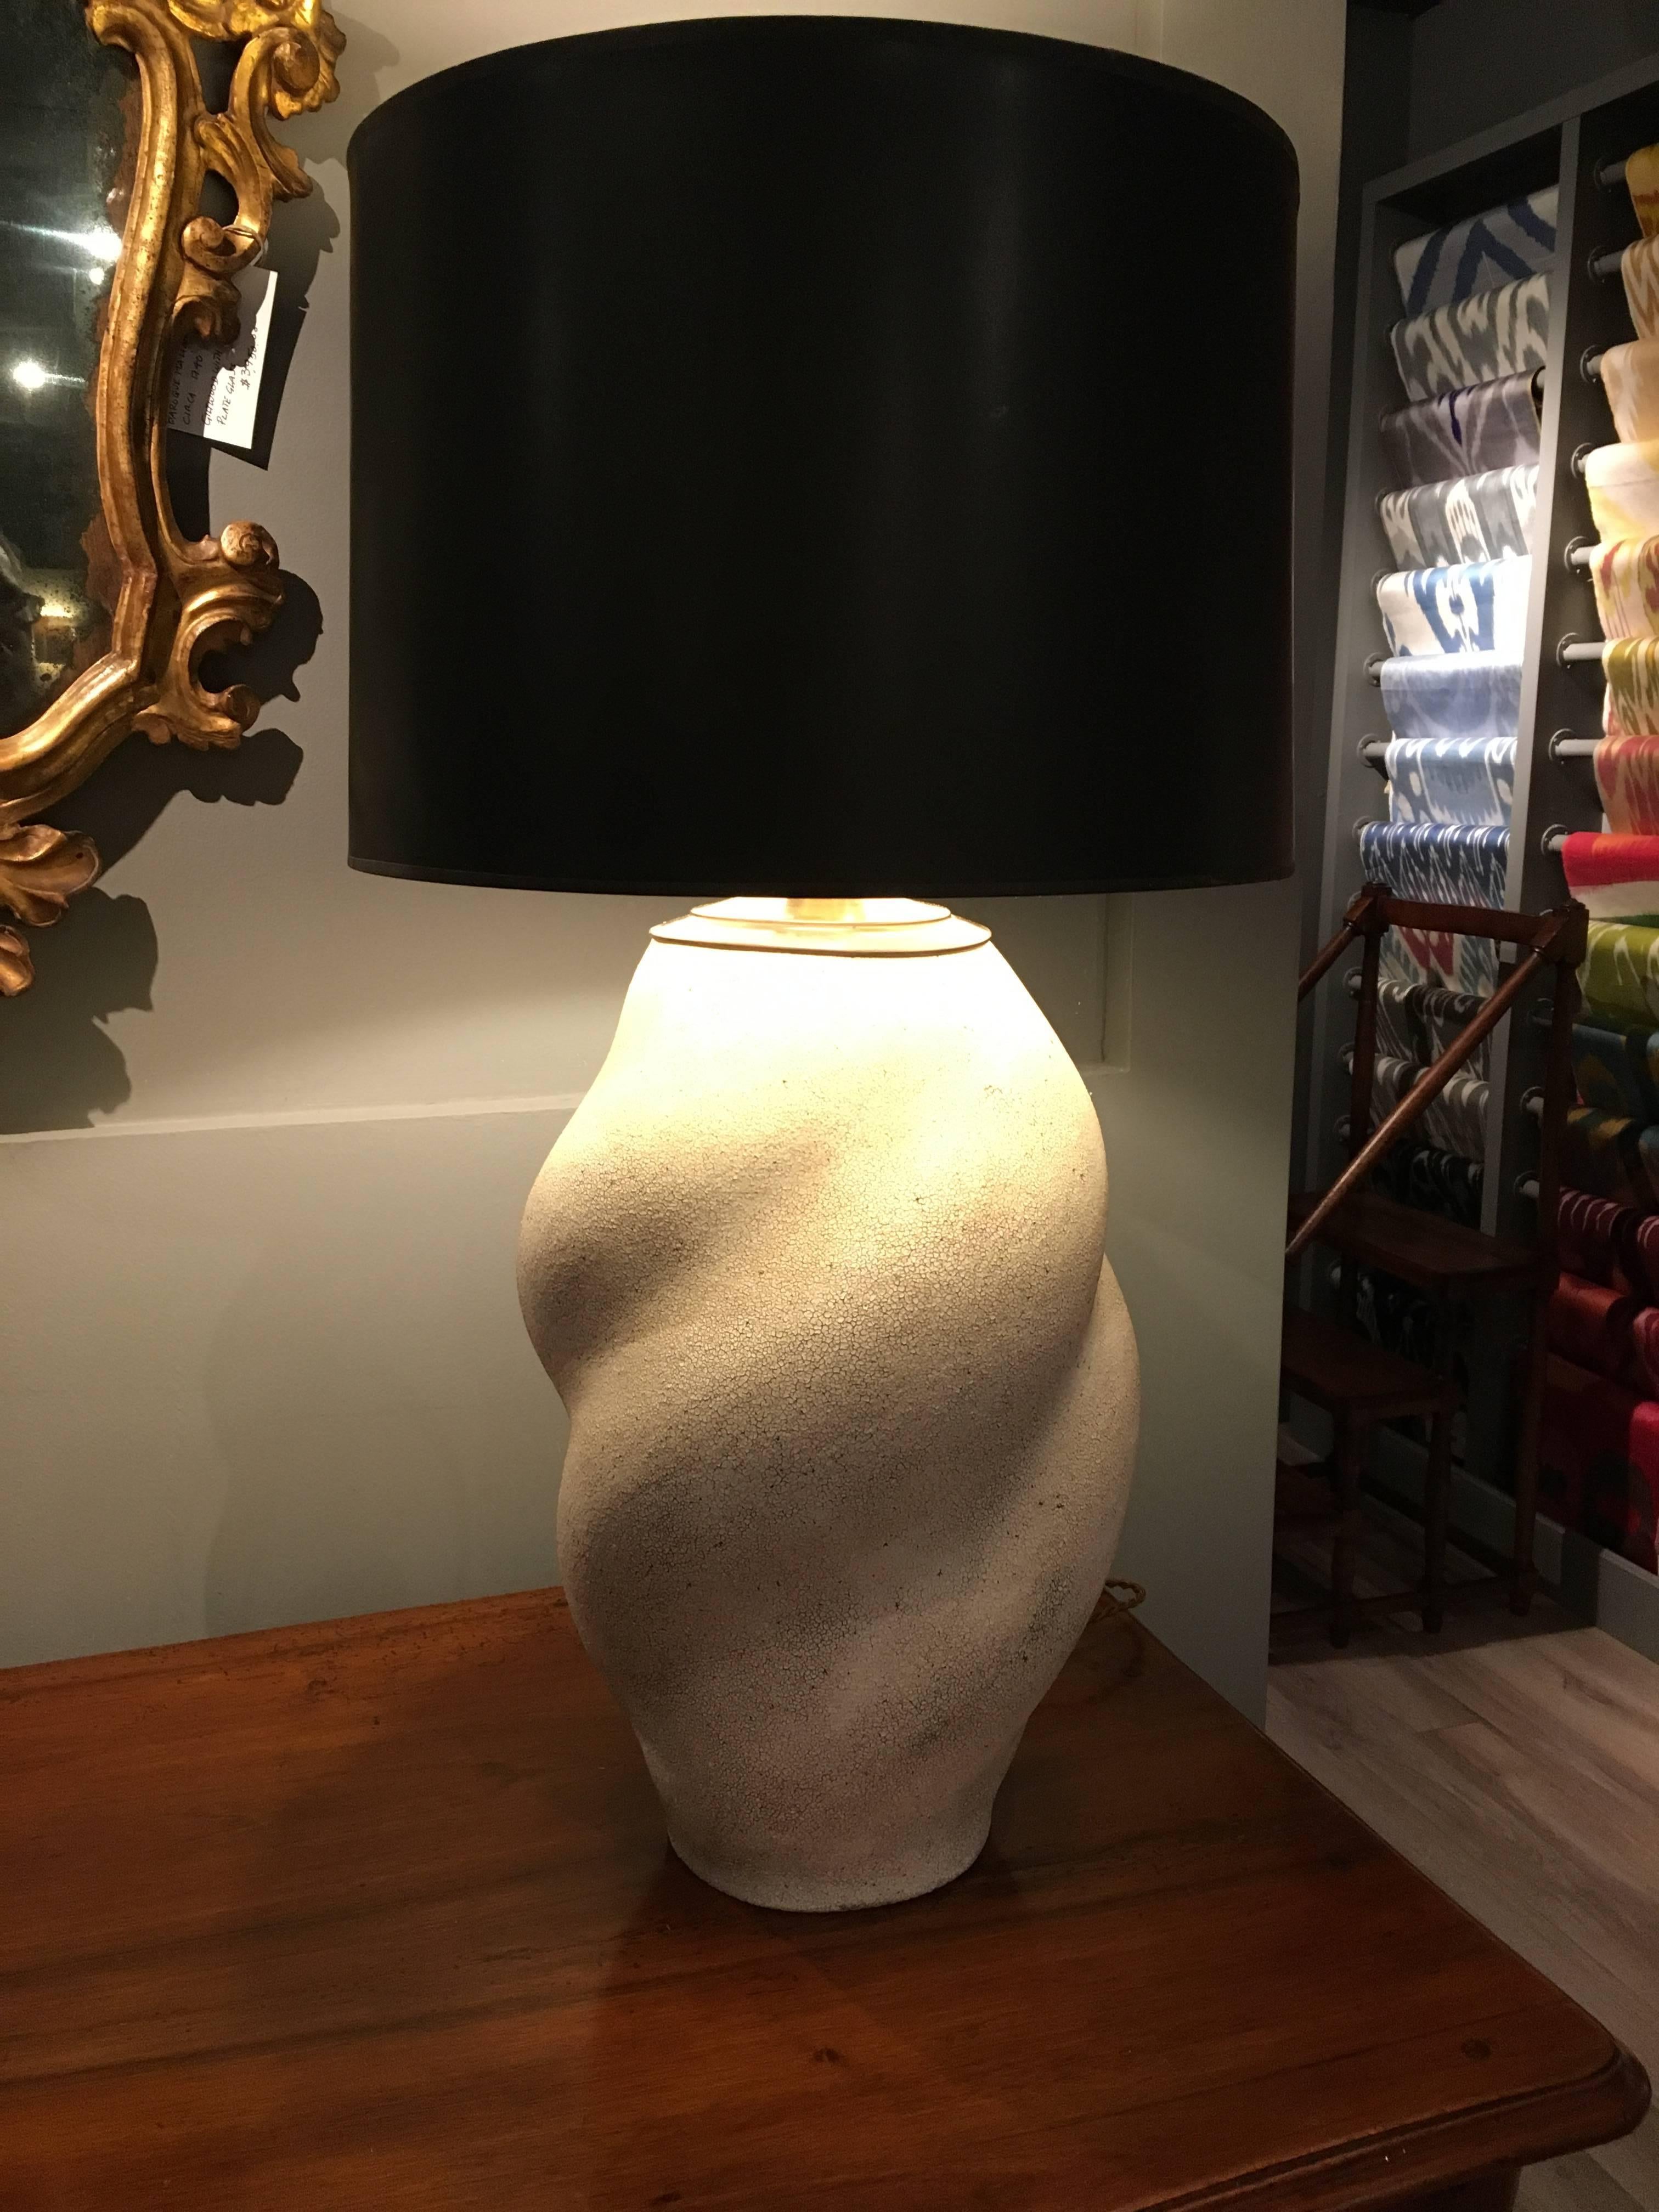 A contemporary glazed ceramic table lamp in vase form by artist Yumiko Kuga, with a dry white crackle glaze, and a brass cap and braided fabric wire.
Signed on bottom. The vase was made as a lamp and has not been drilled, but created with a wire